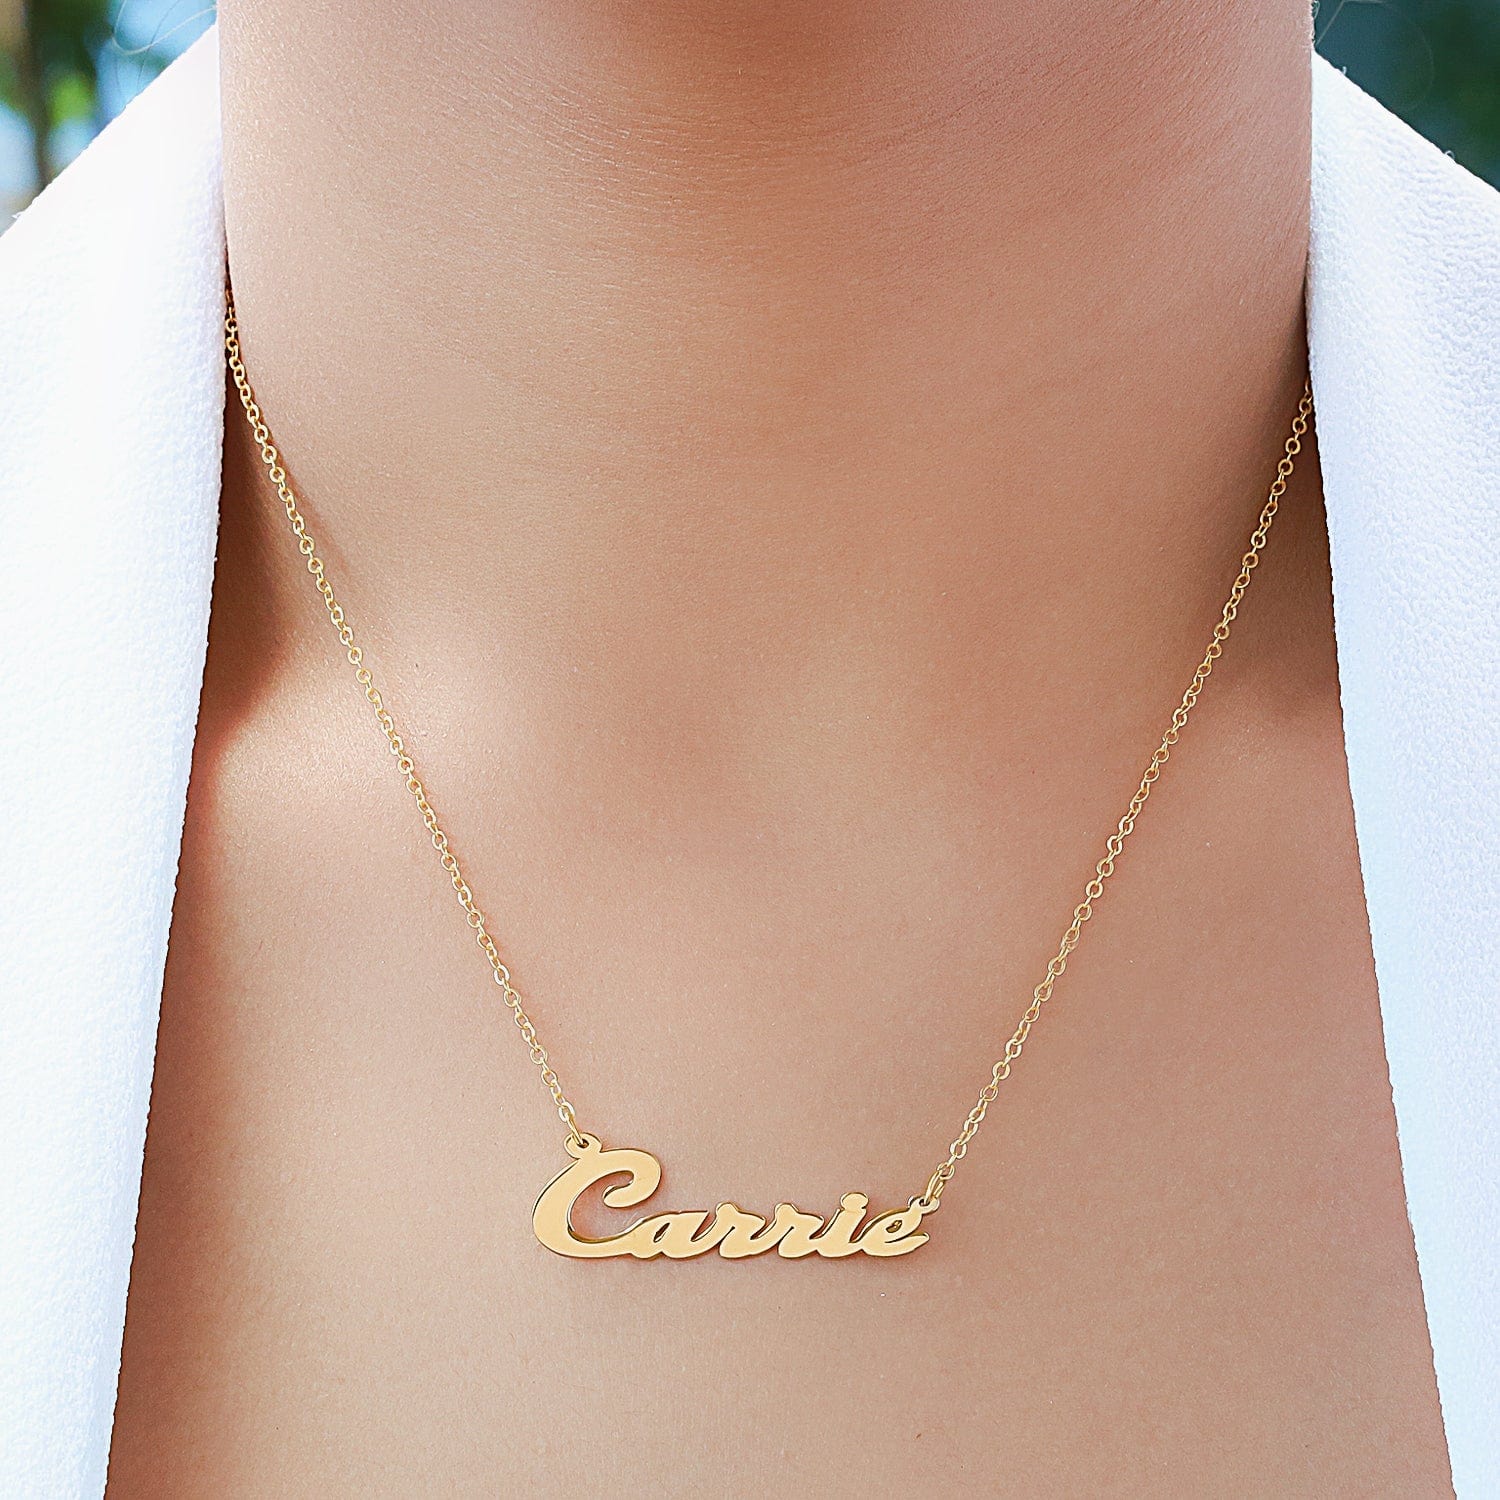 Gold Plated / Link Chain Script Name Necklace "Carrie"